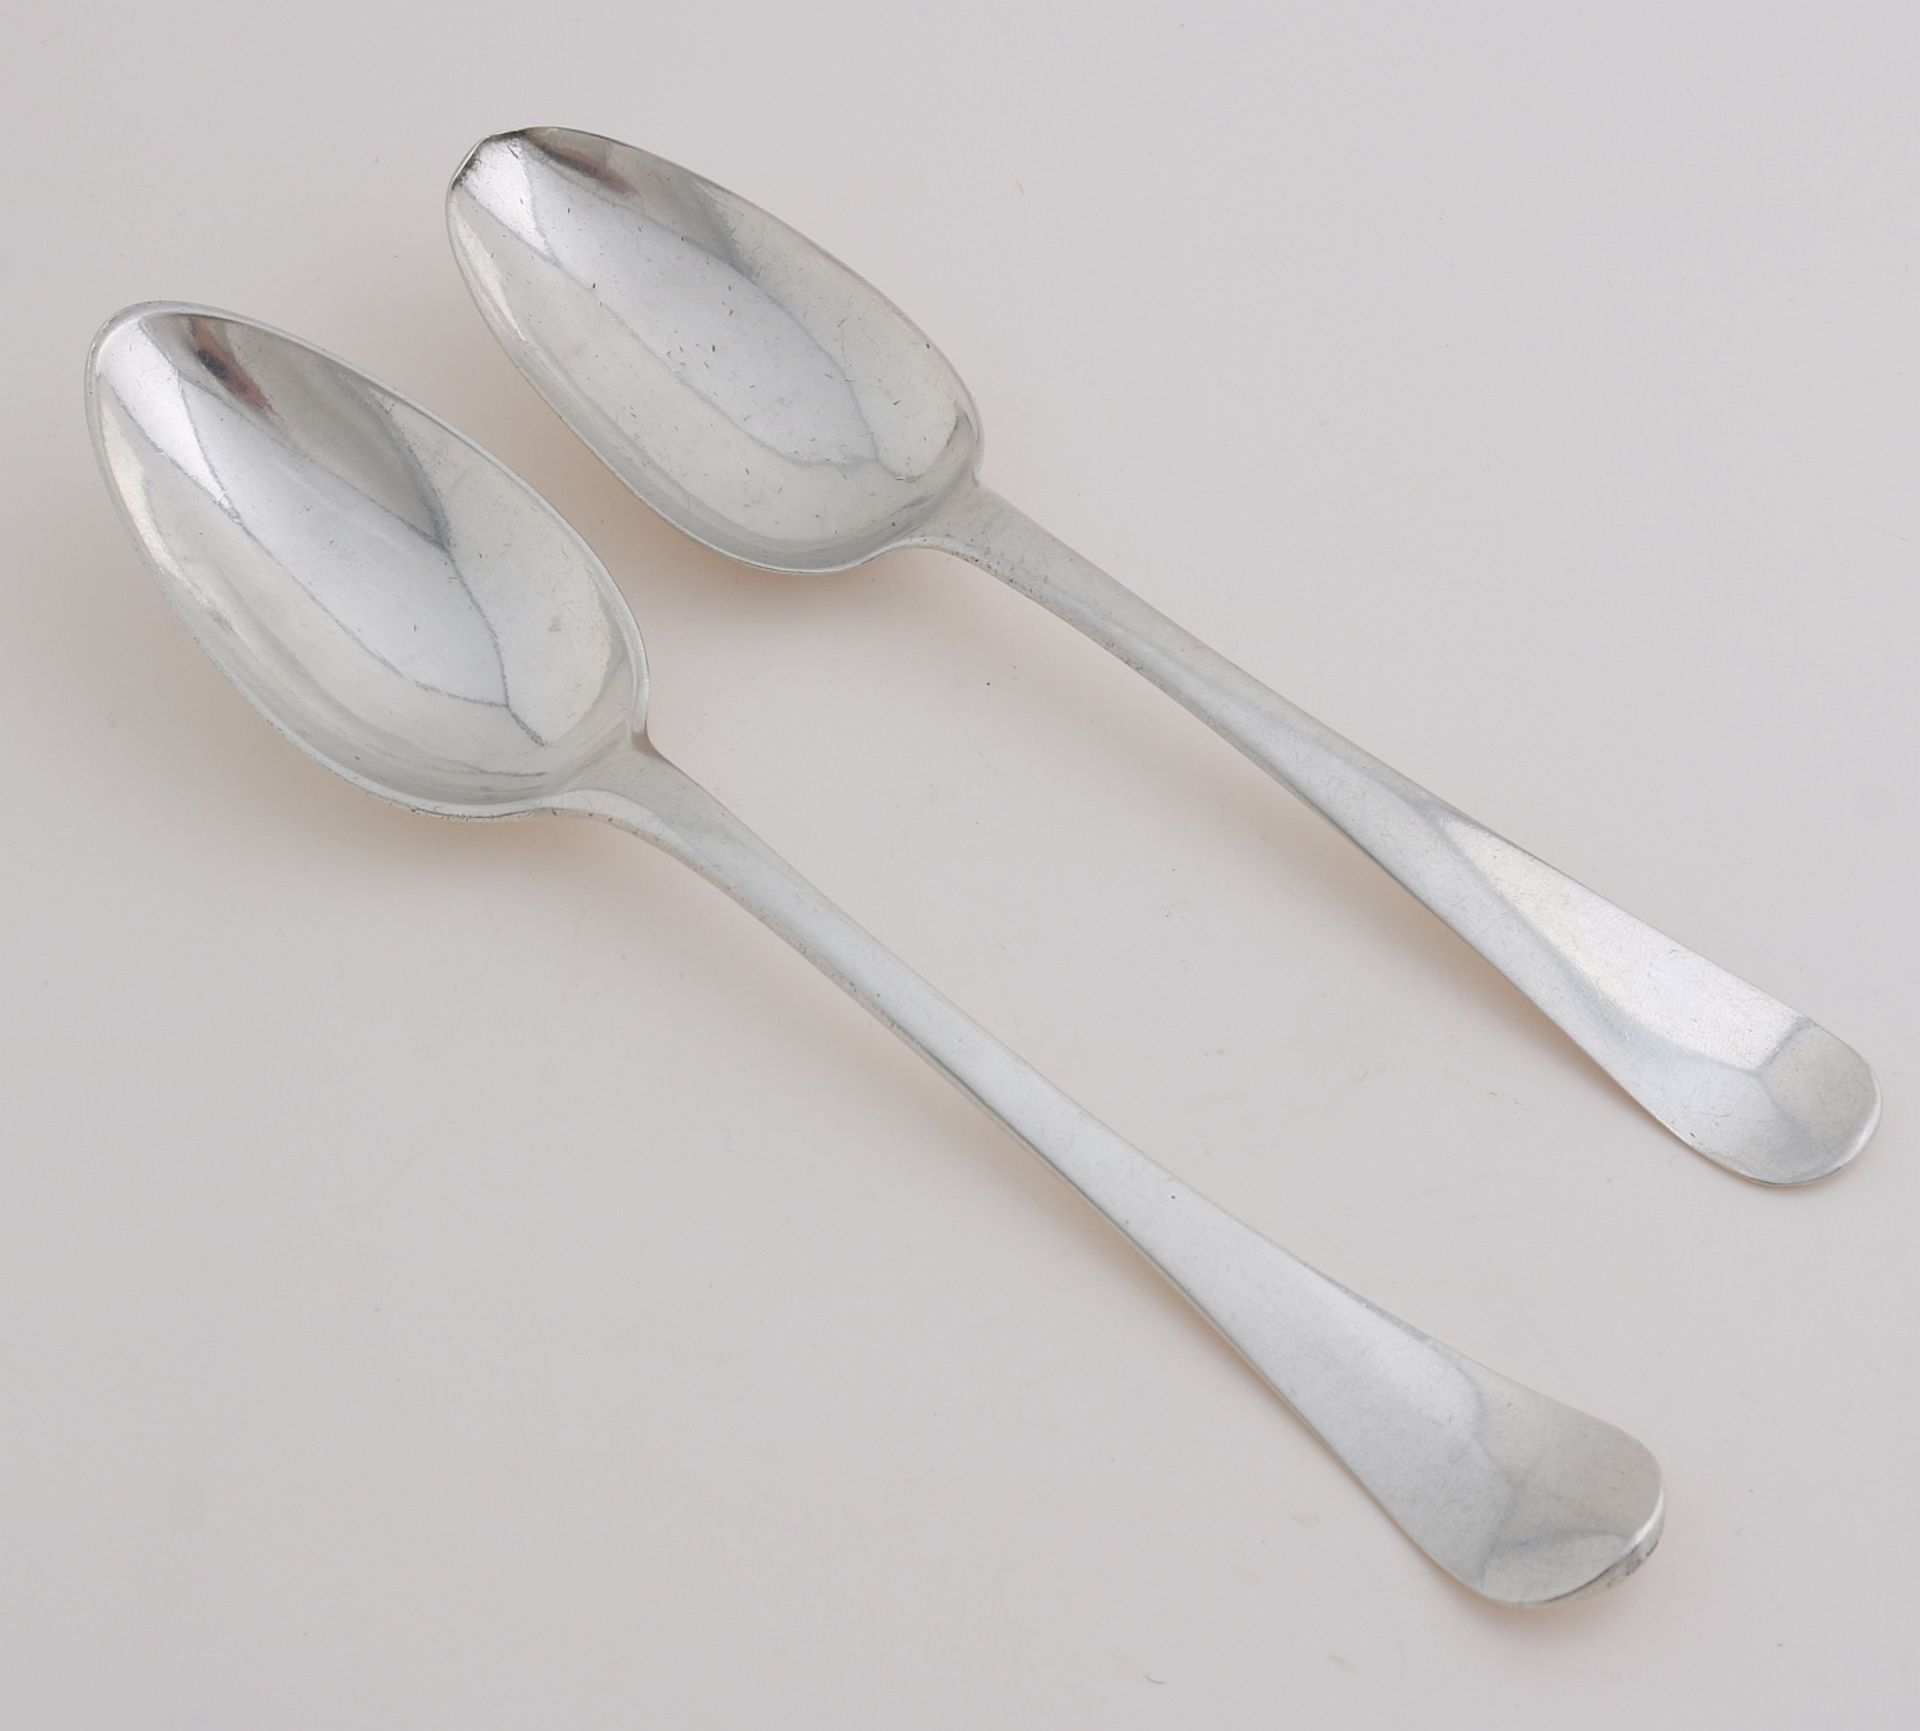 Two 18th century spoons